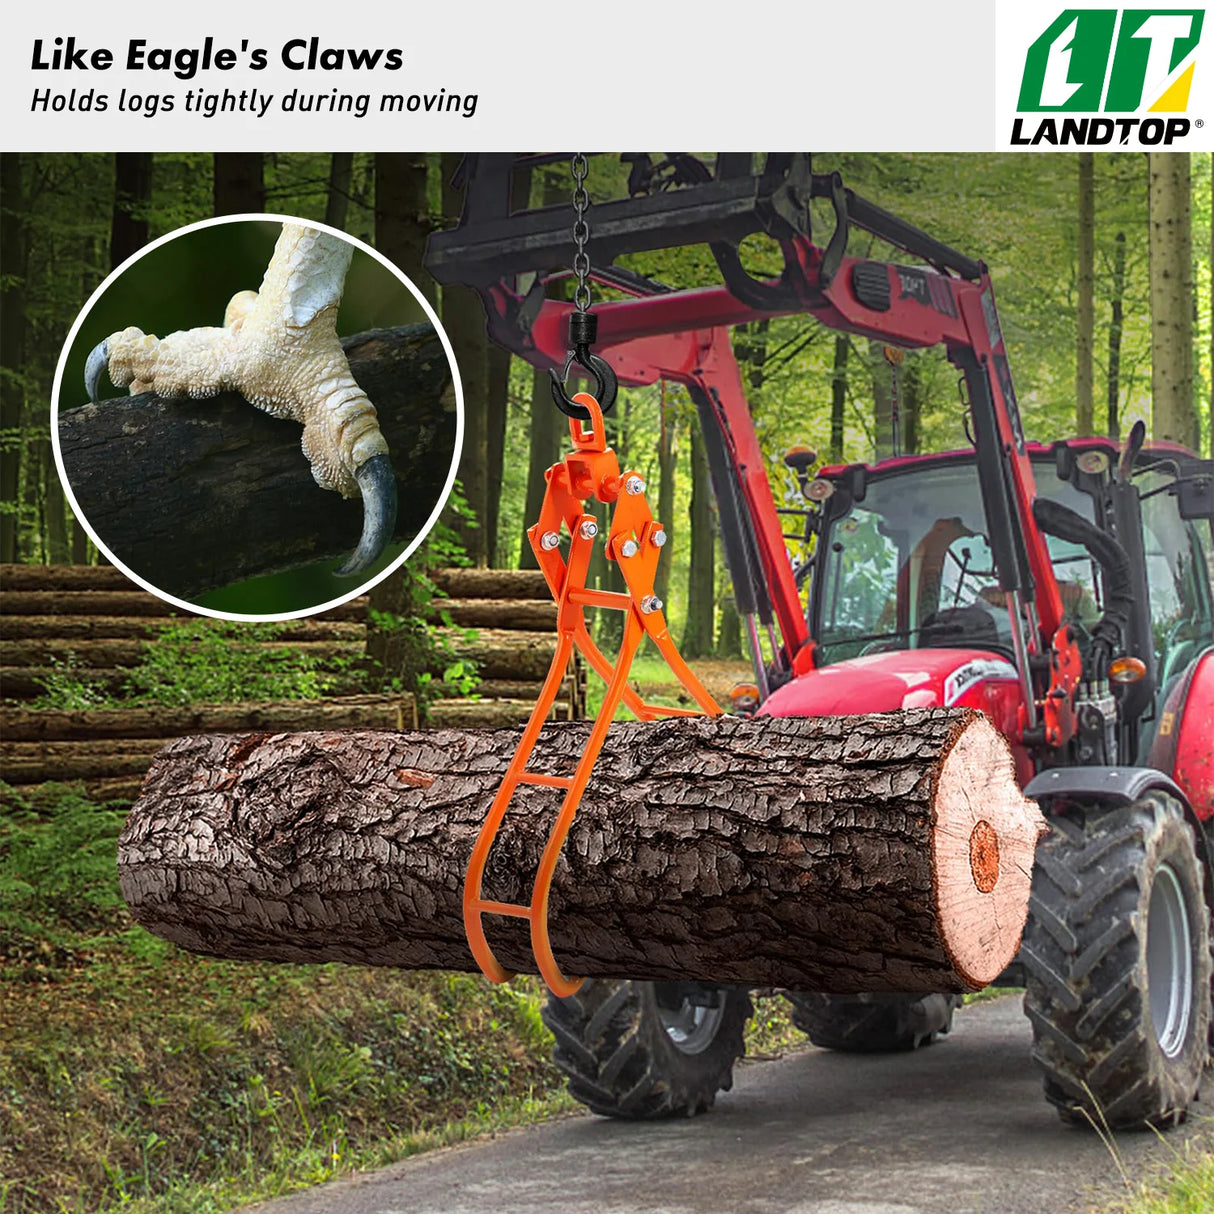 Timber Claw Hook, 36 inch 4 Claw Log Grapple for Logging Tongs, Swivel Steel Log Lifting Tongs, Eagle Claws Design with 3307 lbs/1500 kg Loading Capacity for Tractors, ATVs, Trucks, Forklifts